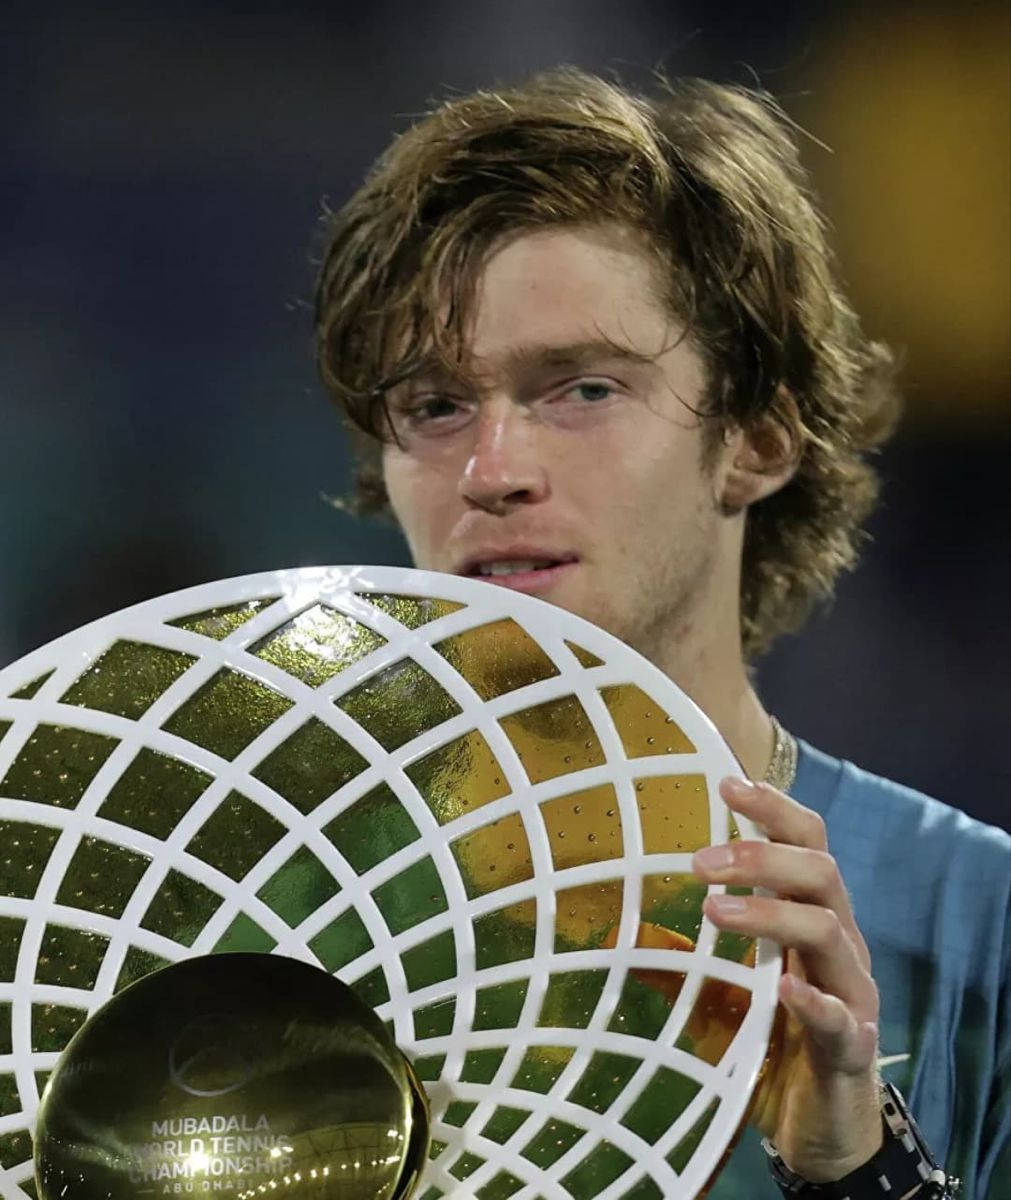 Victorious Moment: Andrey Rublev Holding the Tennis Championship Trophy Wallpaper